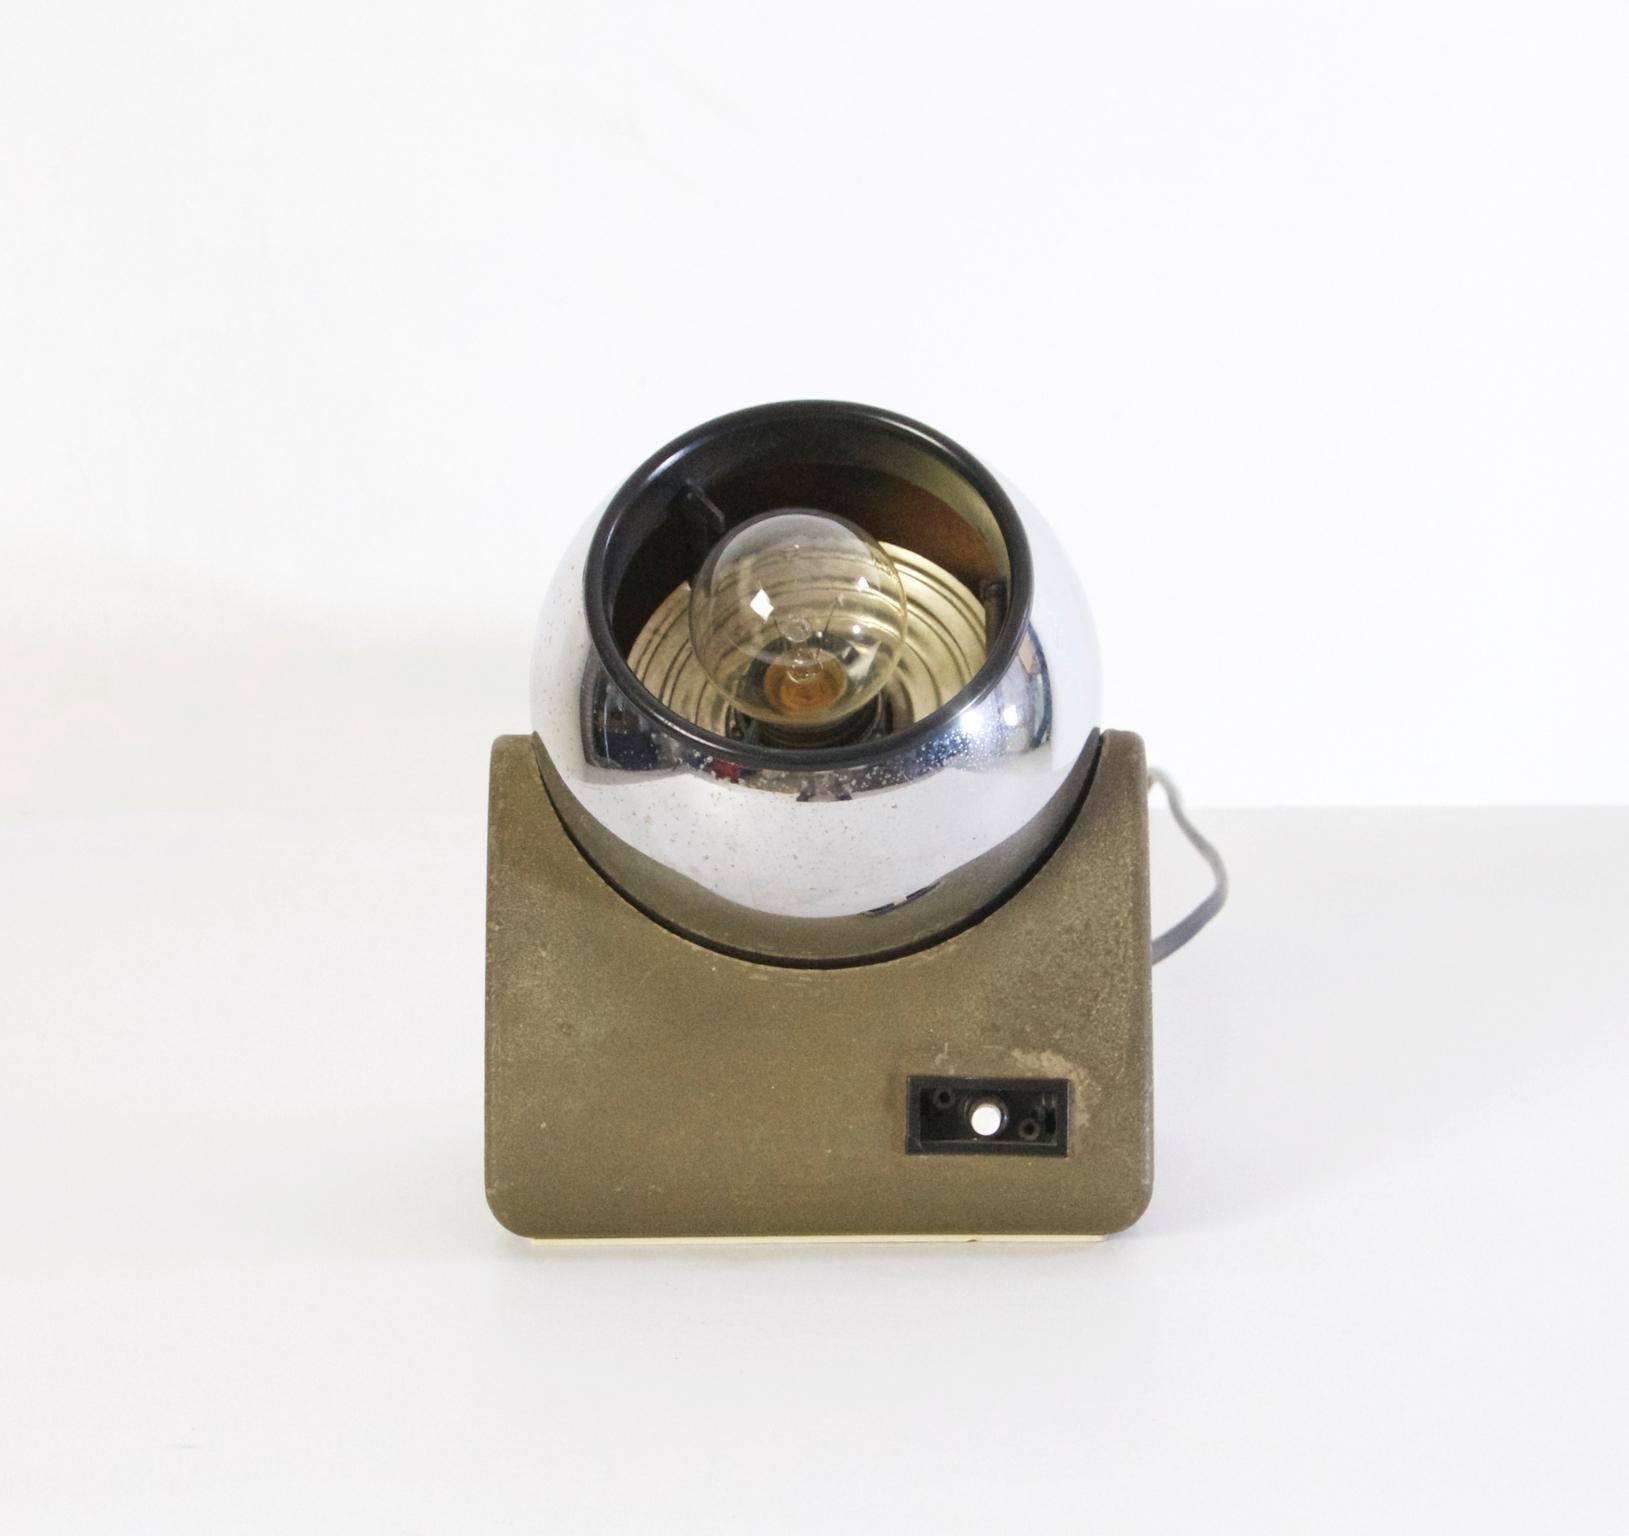 A fun lamp suitable for small spaces or to put an accent light on an object. The chrome ball is attached with a magnet making it possible to direct the light in any direction. Can be used with a silver tipped lightbulb to soften the light emitted.